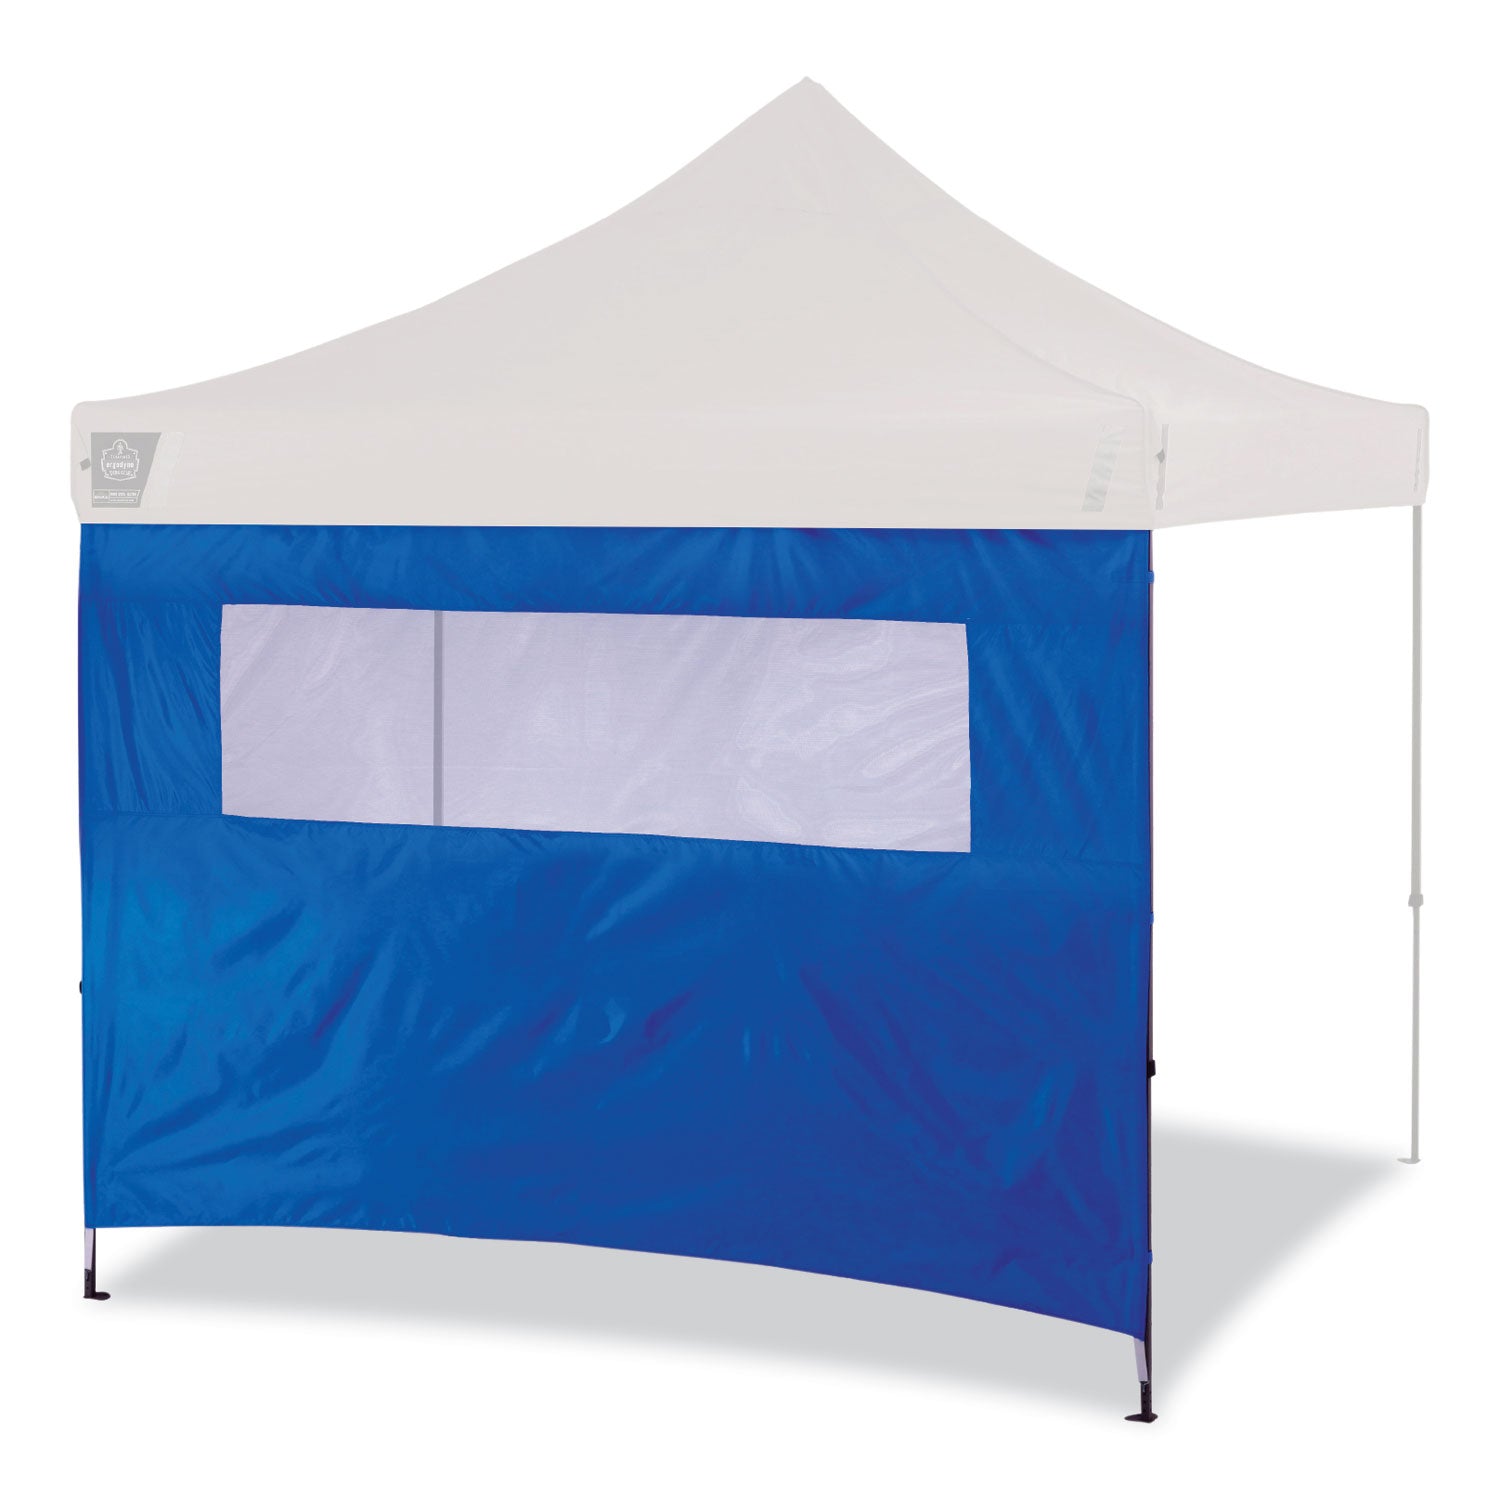 shax-6092-pop-up-tent-sidewall-with-mesh-window-single-skin-10-ft-x-10-ft-polyester-blue-ships-in-1-3-business-days_ego12987 - 1